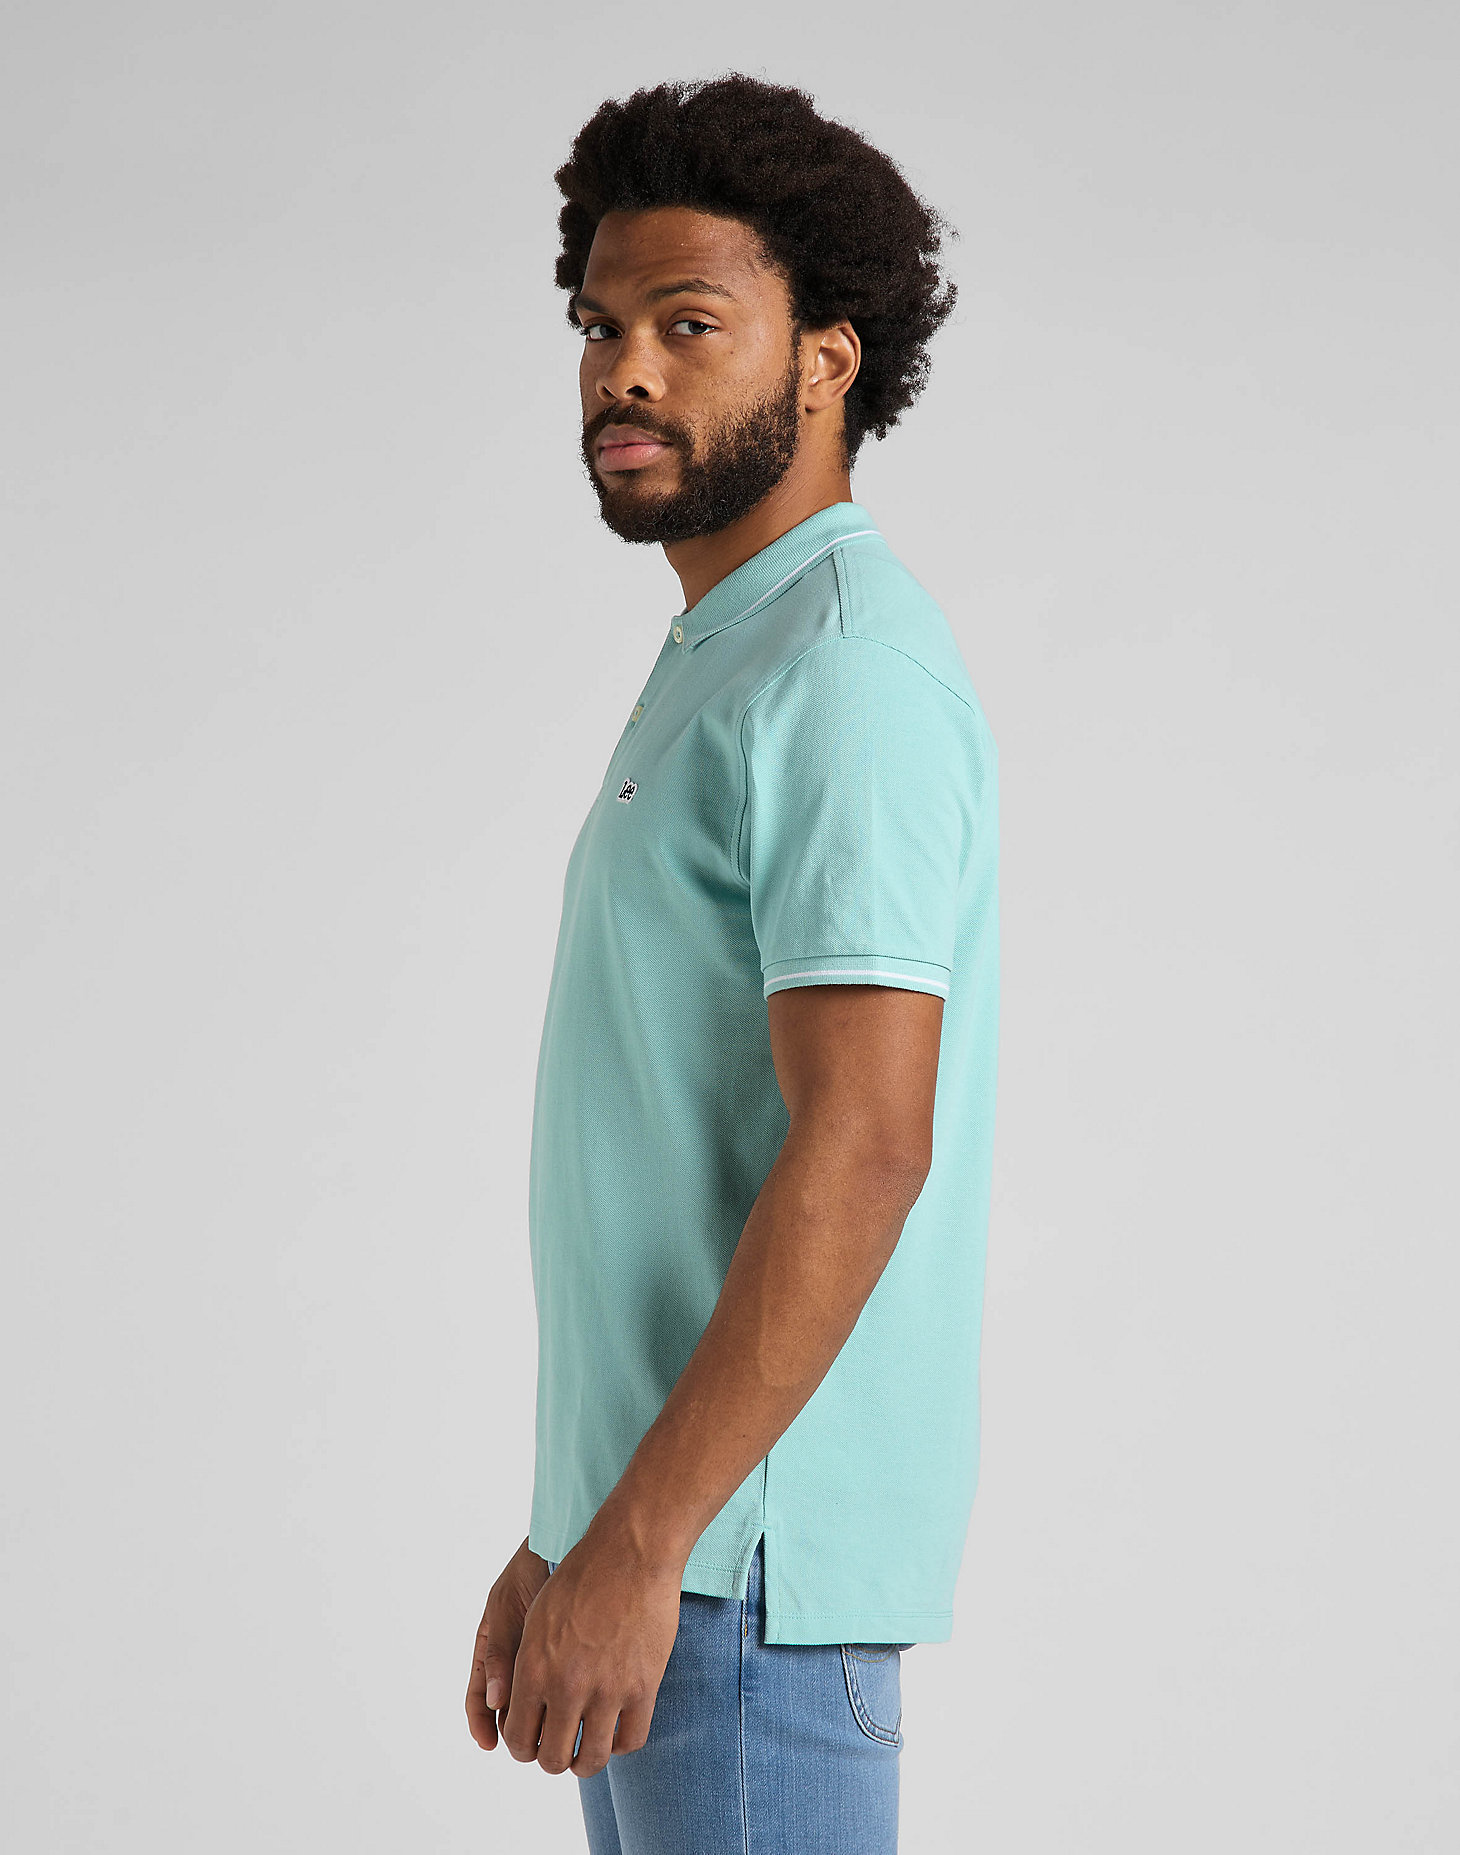 Pique Polo in Mint Blue alternative view 4